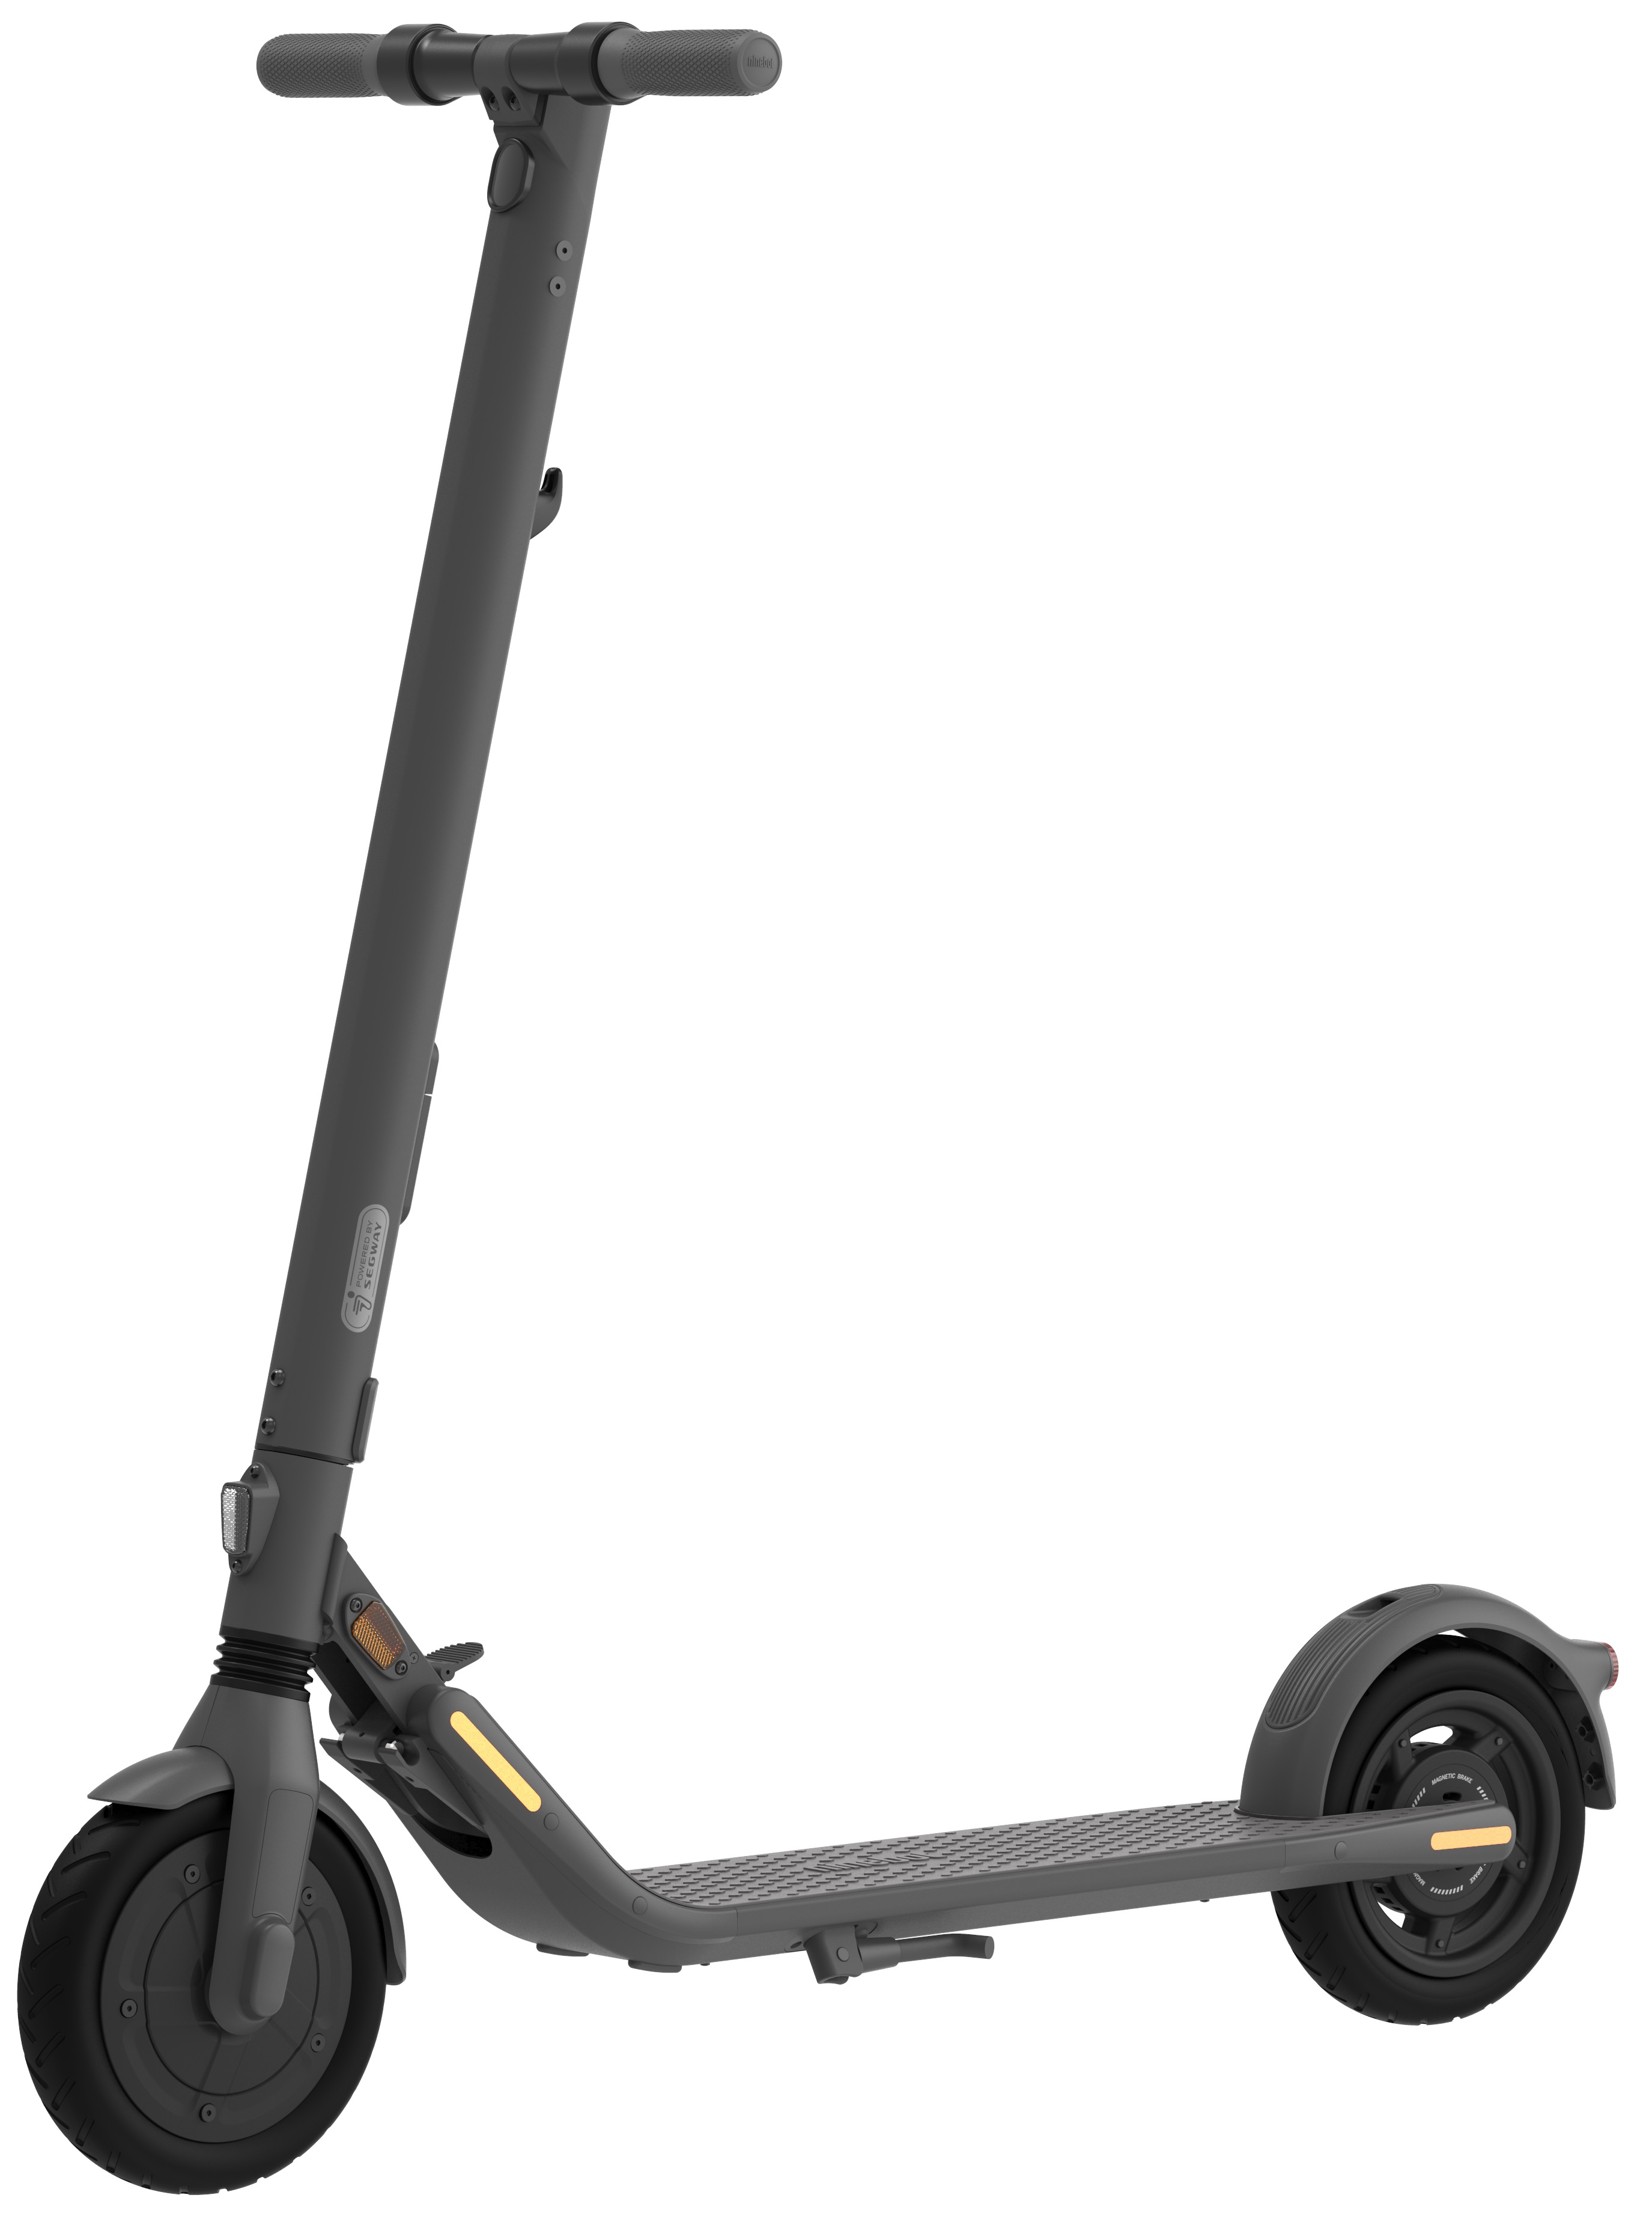 Segway Ninebot E25a Electric Kick Scooter Electric, Upgraded Motor Power, 9-inch Dual Density Tires, Lightweight and Foldable - image 1 of 18